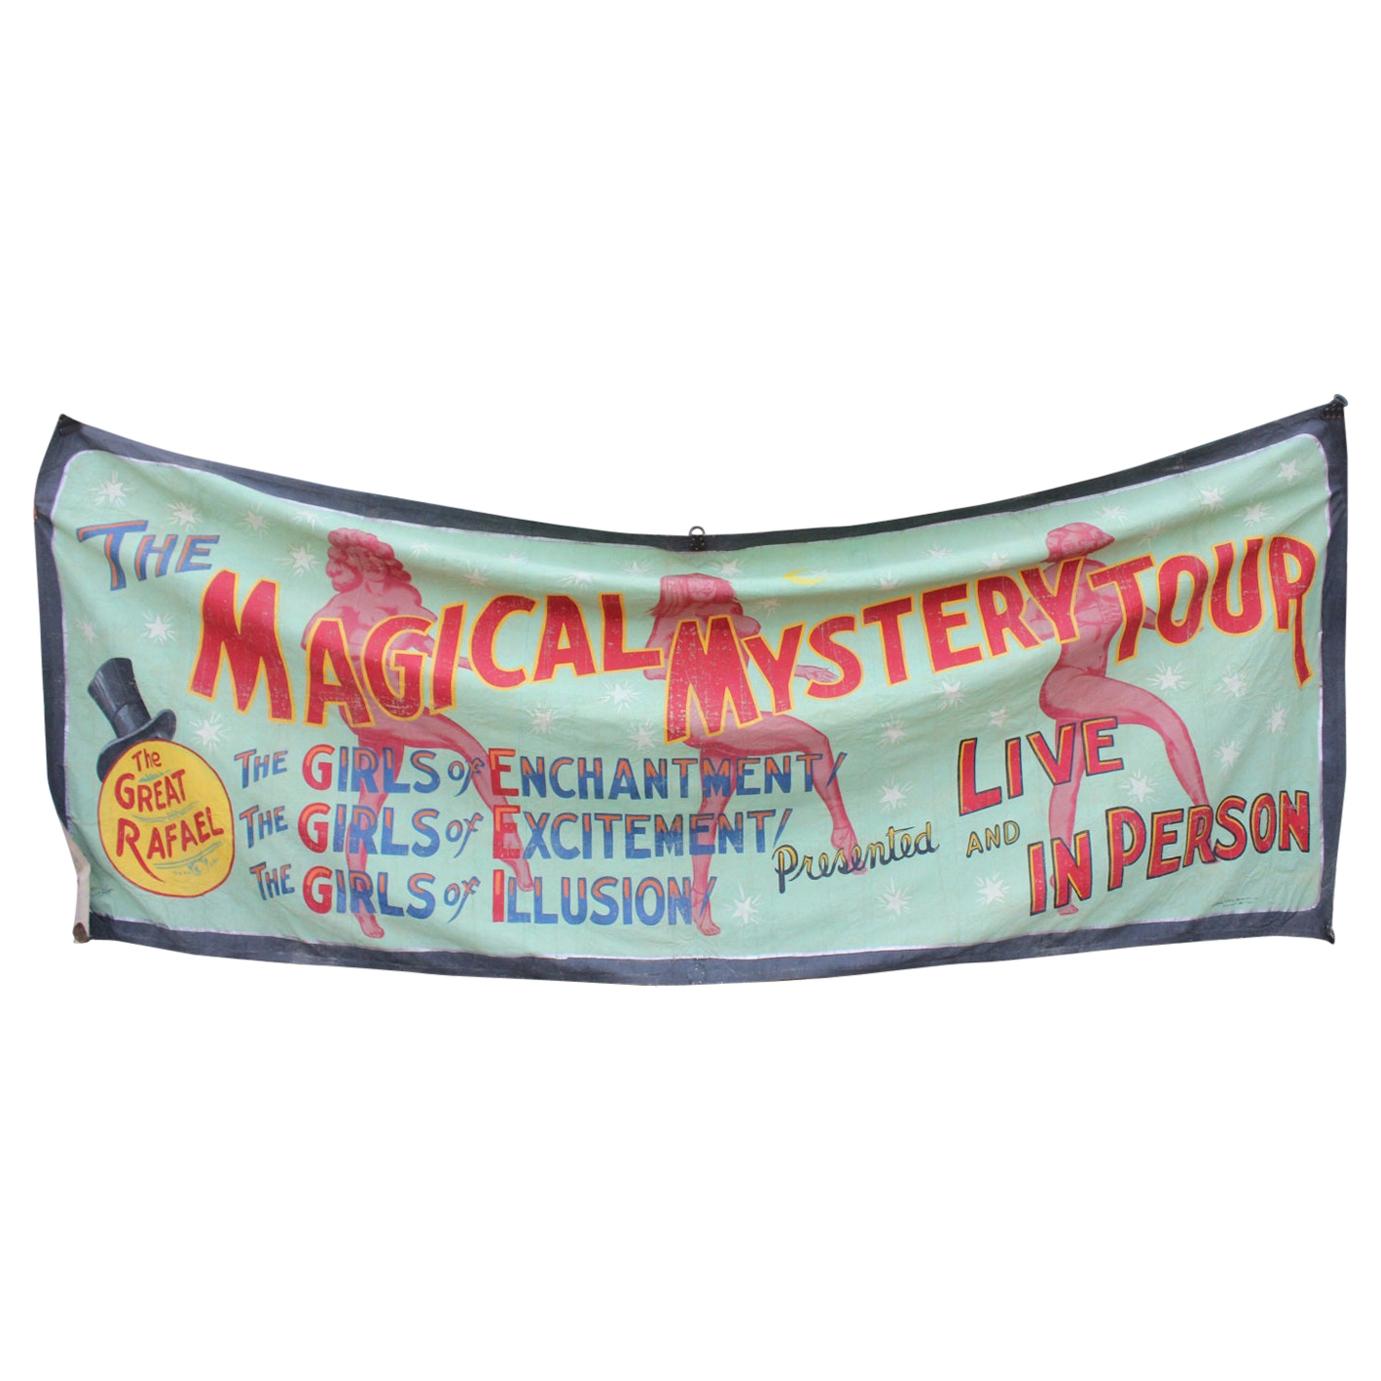 Vintage Sideshow Banner by Fred Johnson For Sale